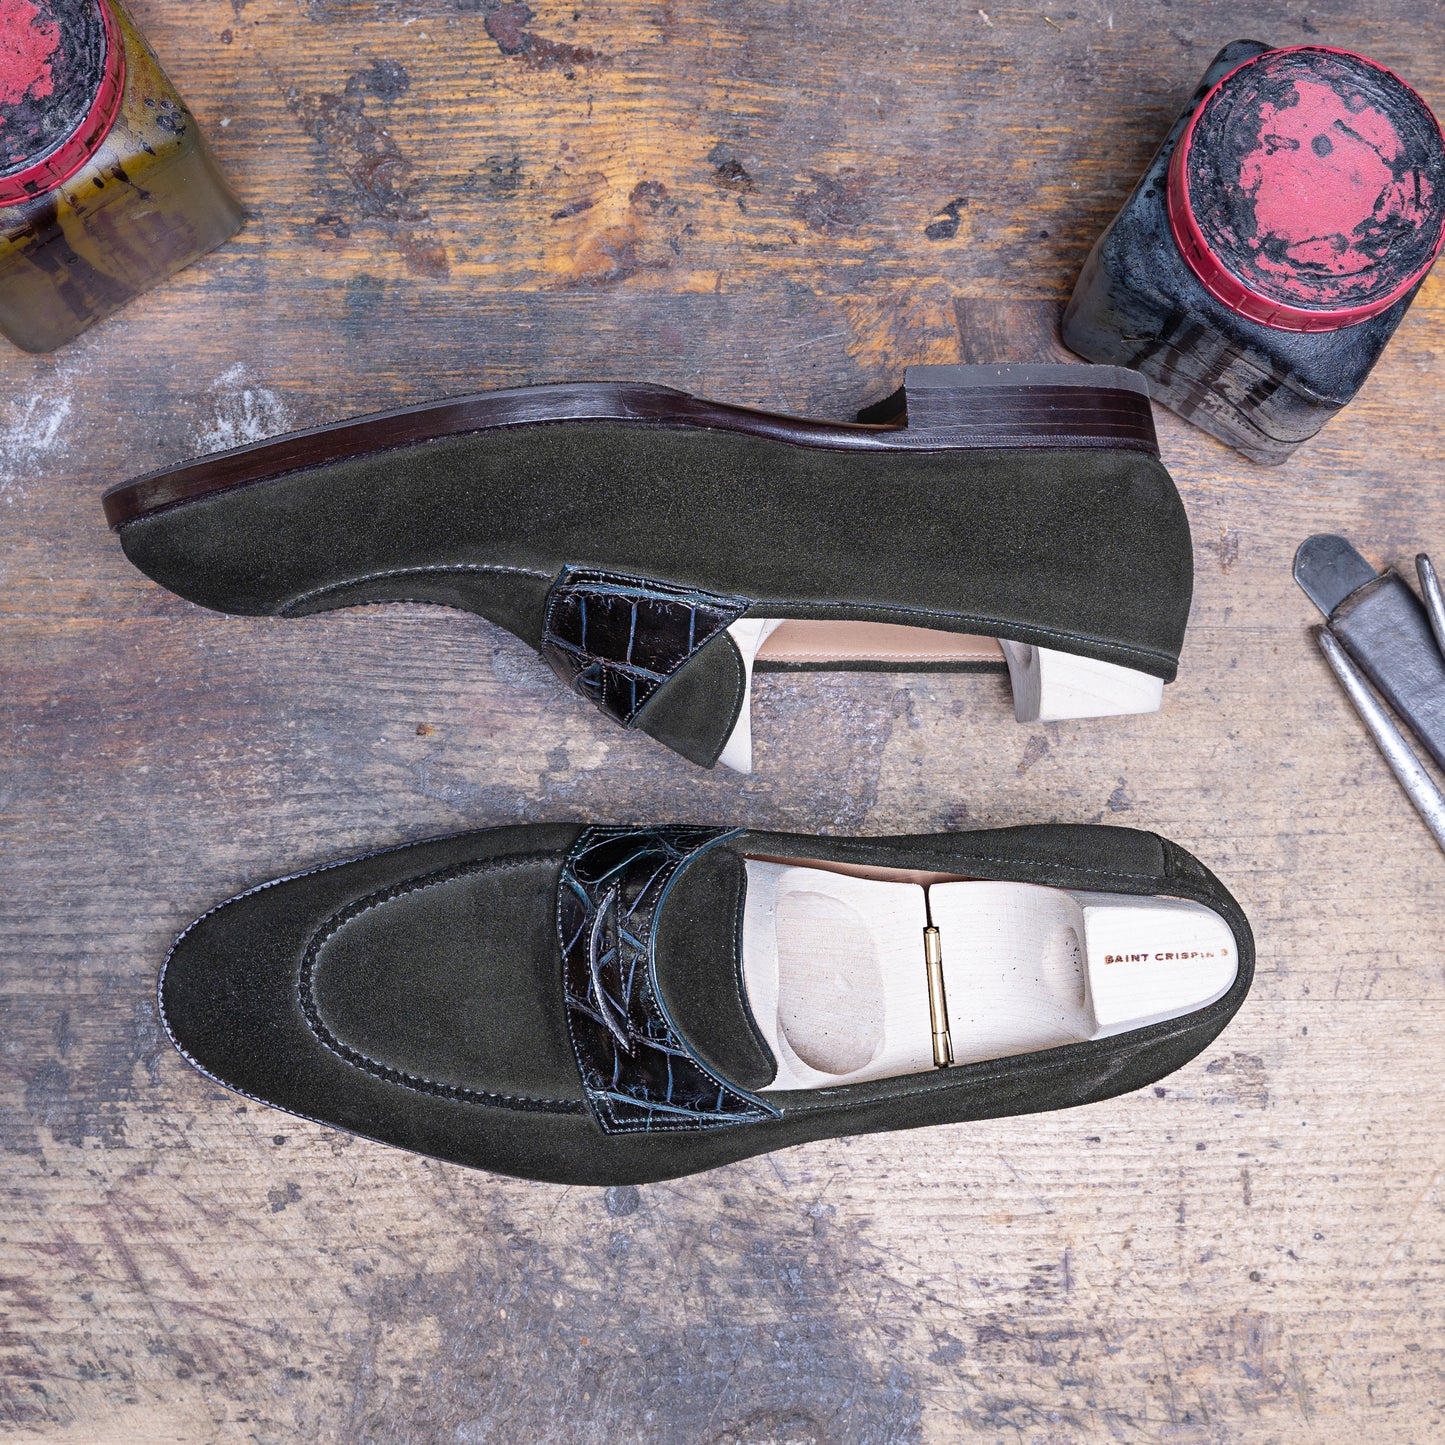 Classic Penny loafer with hand stitched apron